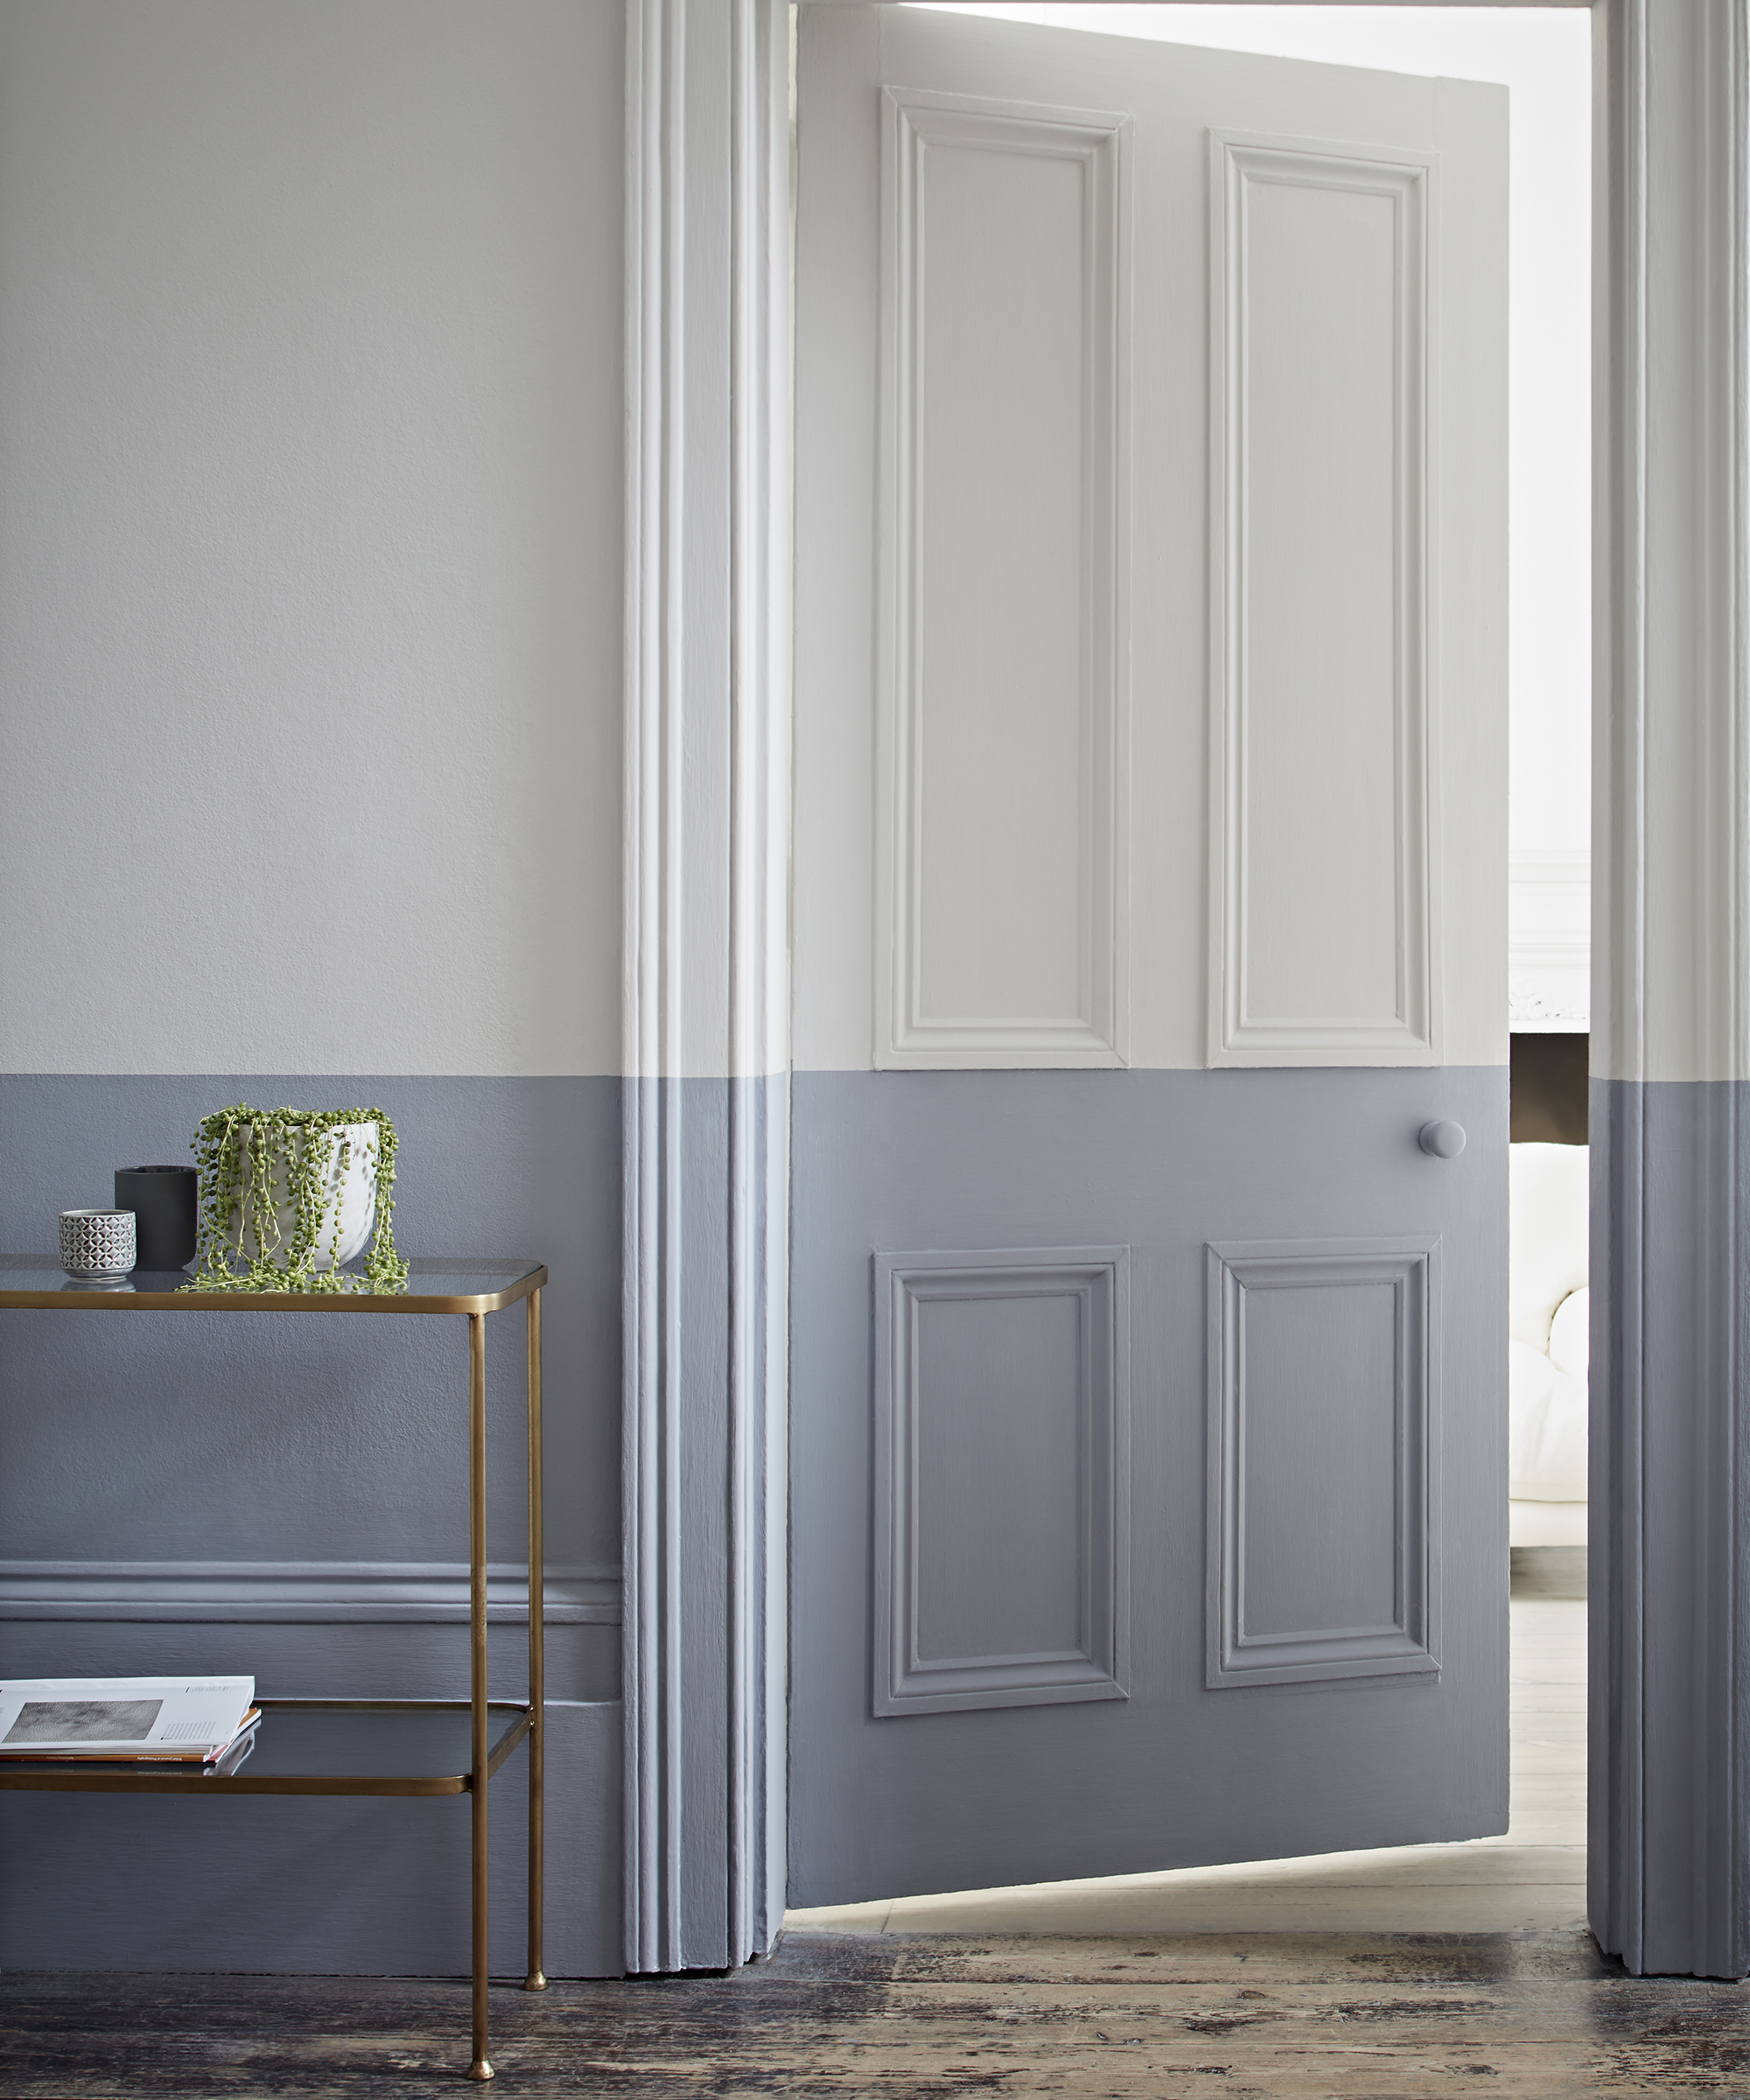 Hallway ideas by Crown using pastel blue and white emulsion paint in a half and half decor design